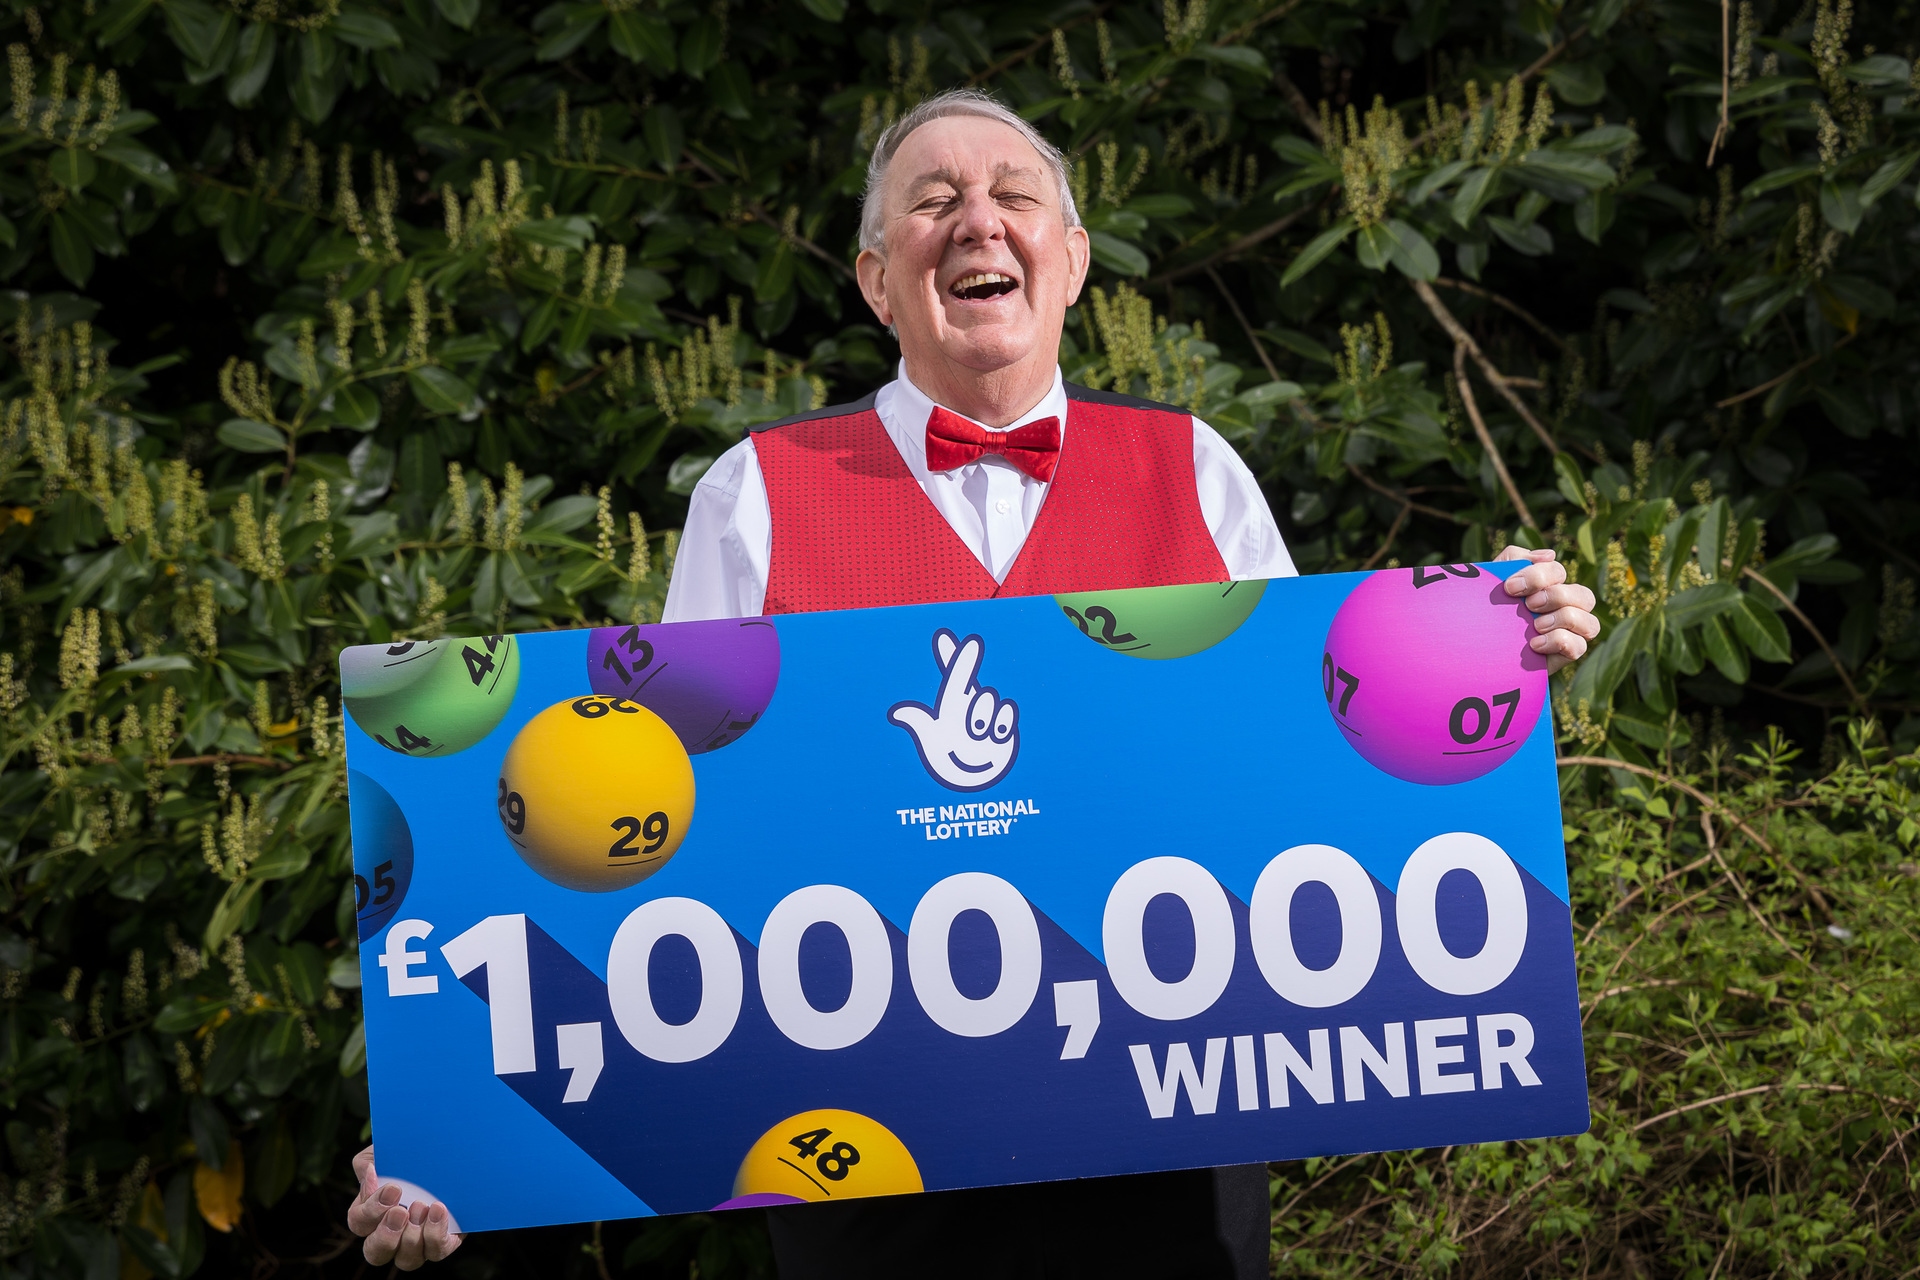 John was shocked to learn he had won the prize. (Nick Mailer/National Lottery)